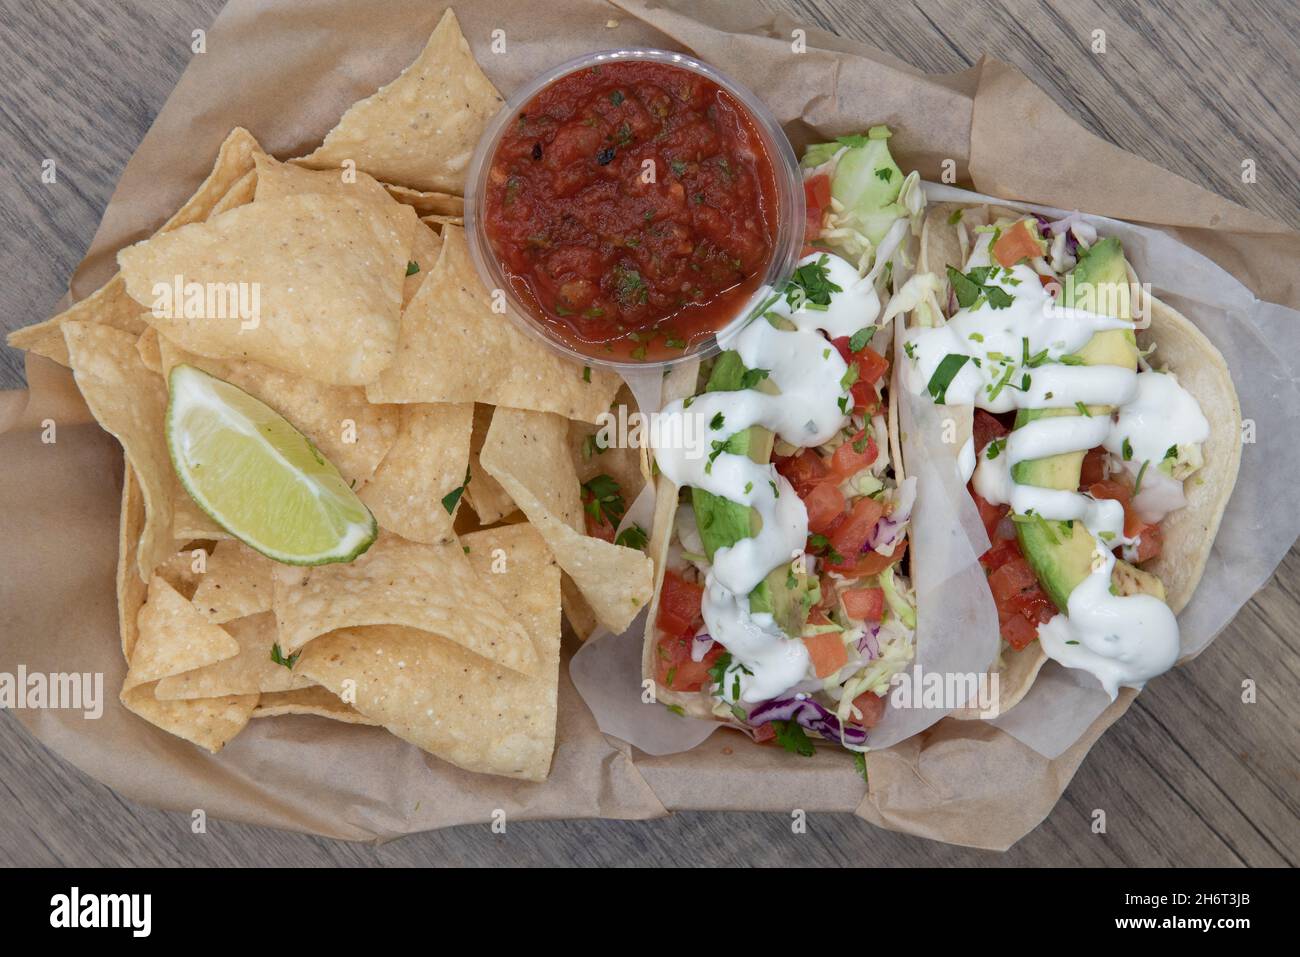 Overhead view of hearty basket full of chips and salsa to eat with three fish tacos. Stock Photo